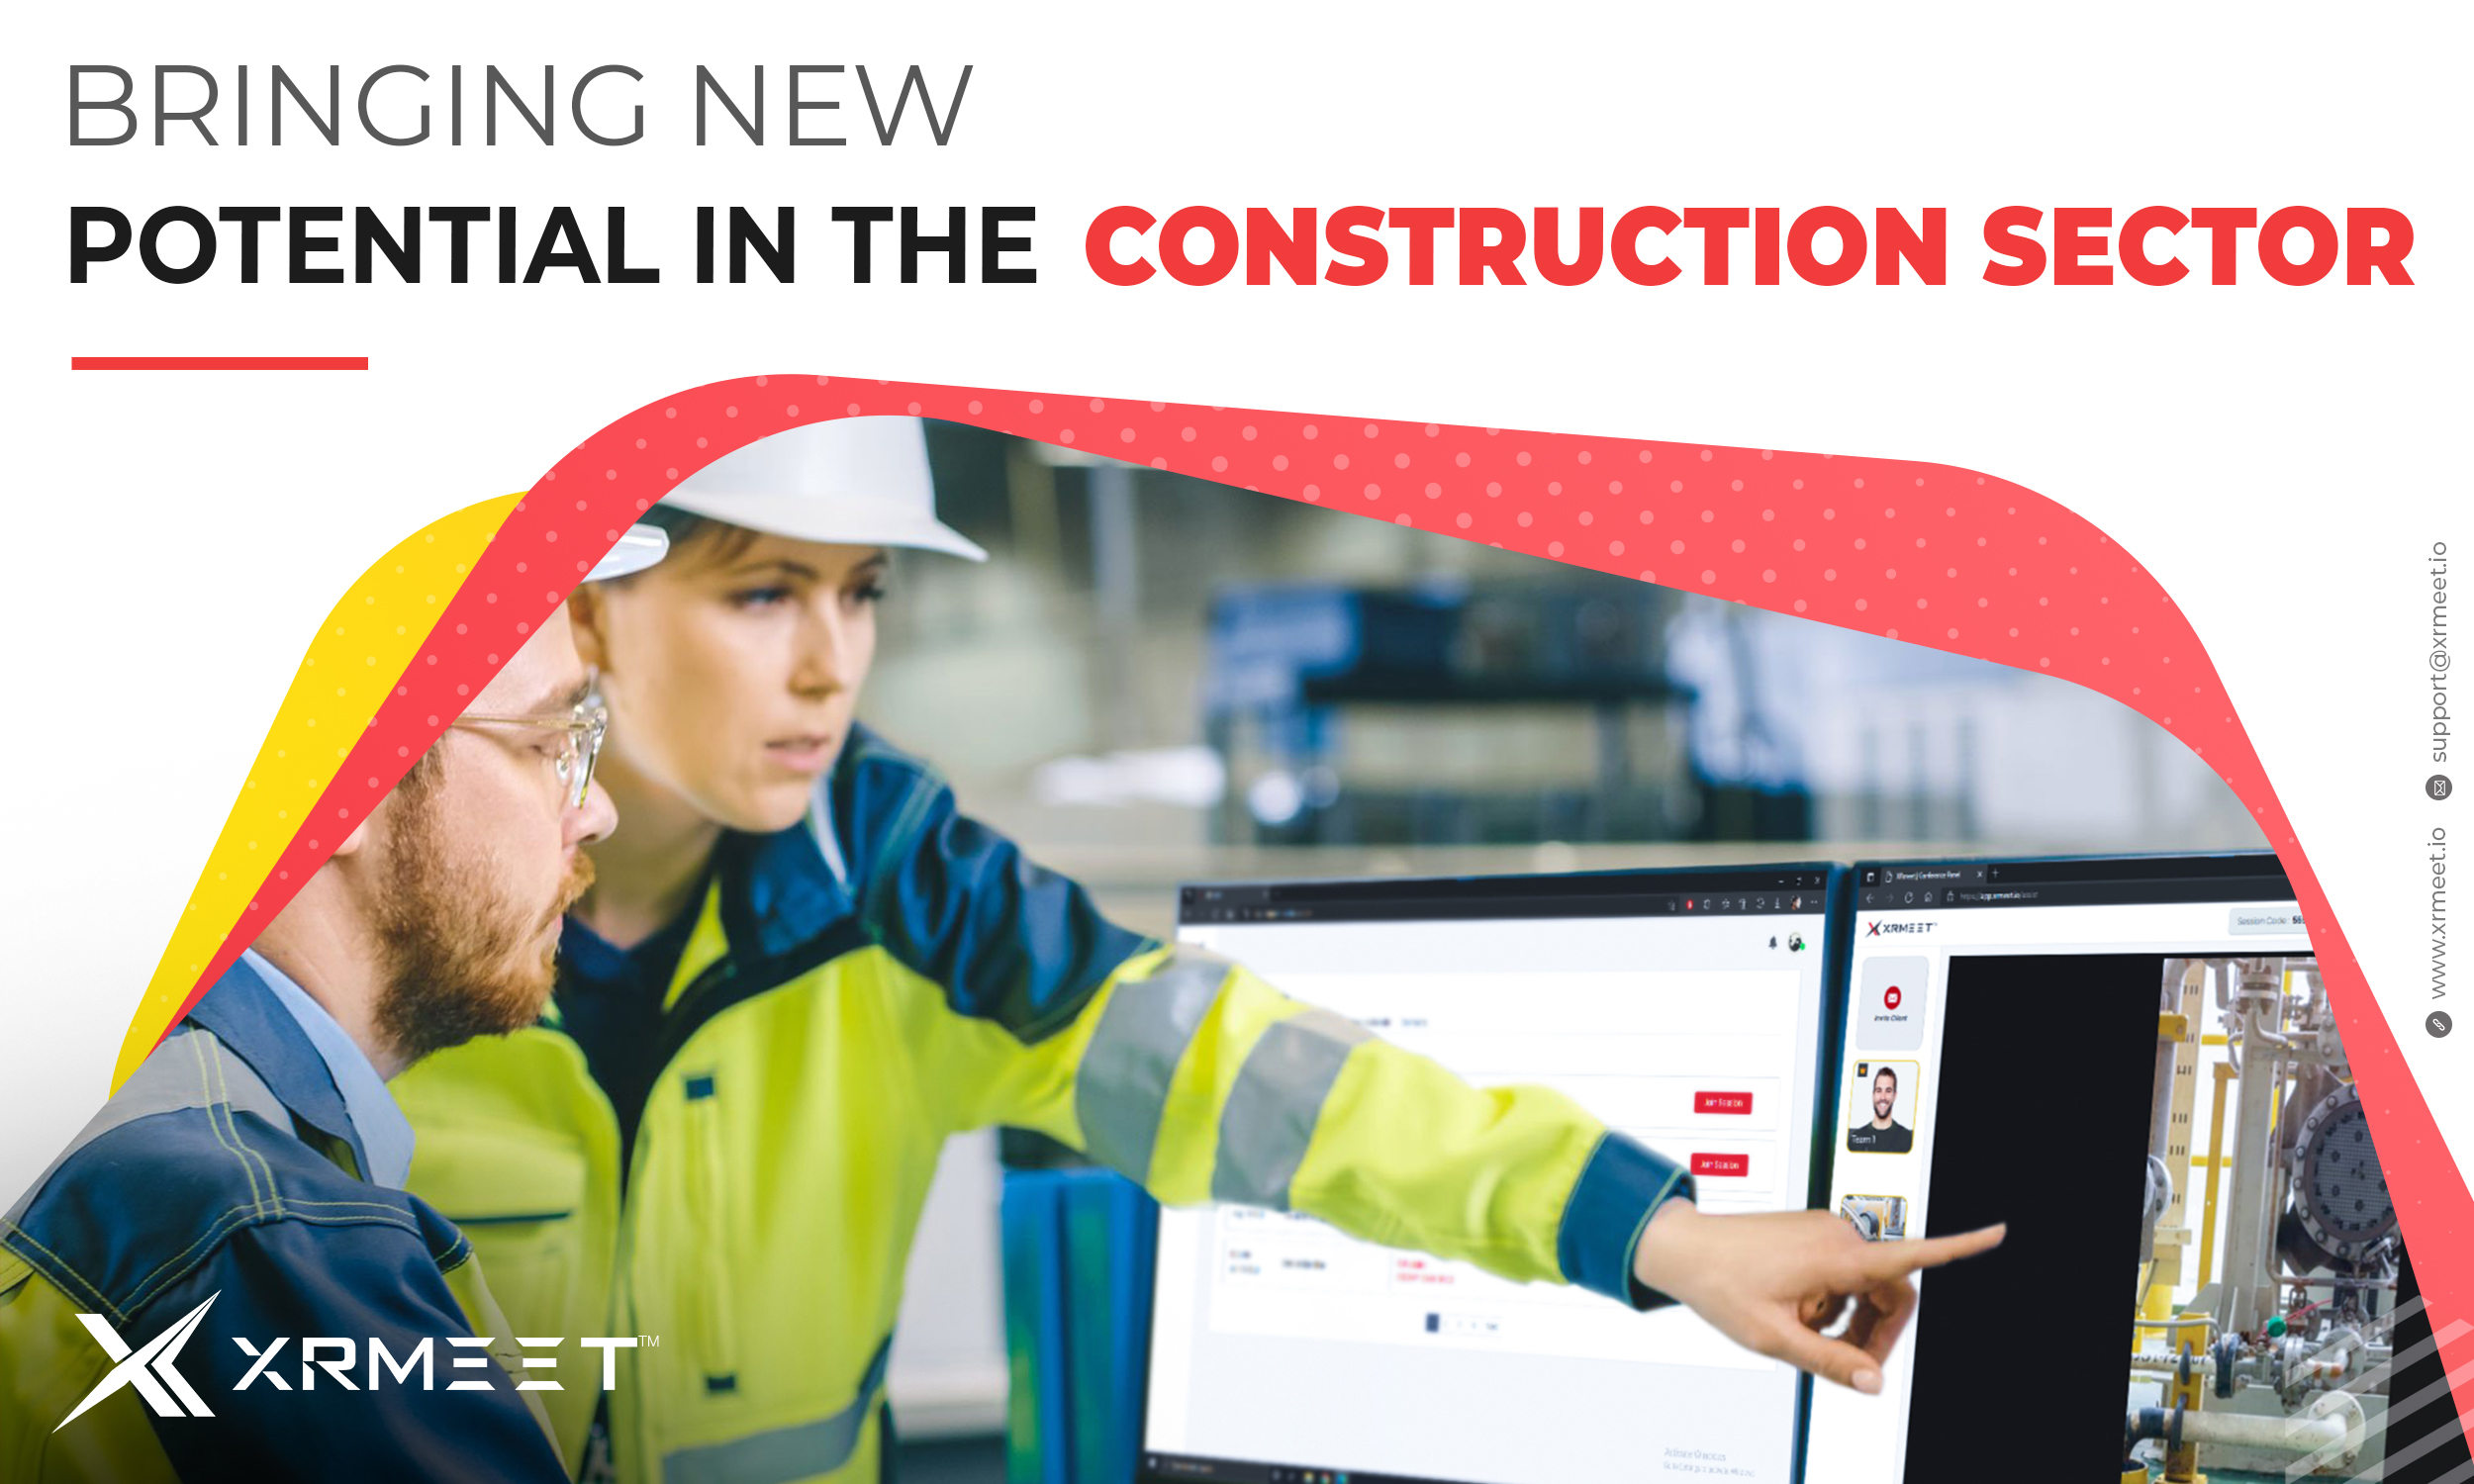  AR, Bringing New Potential in the Construction Sector